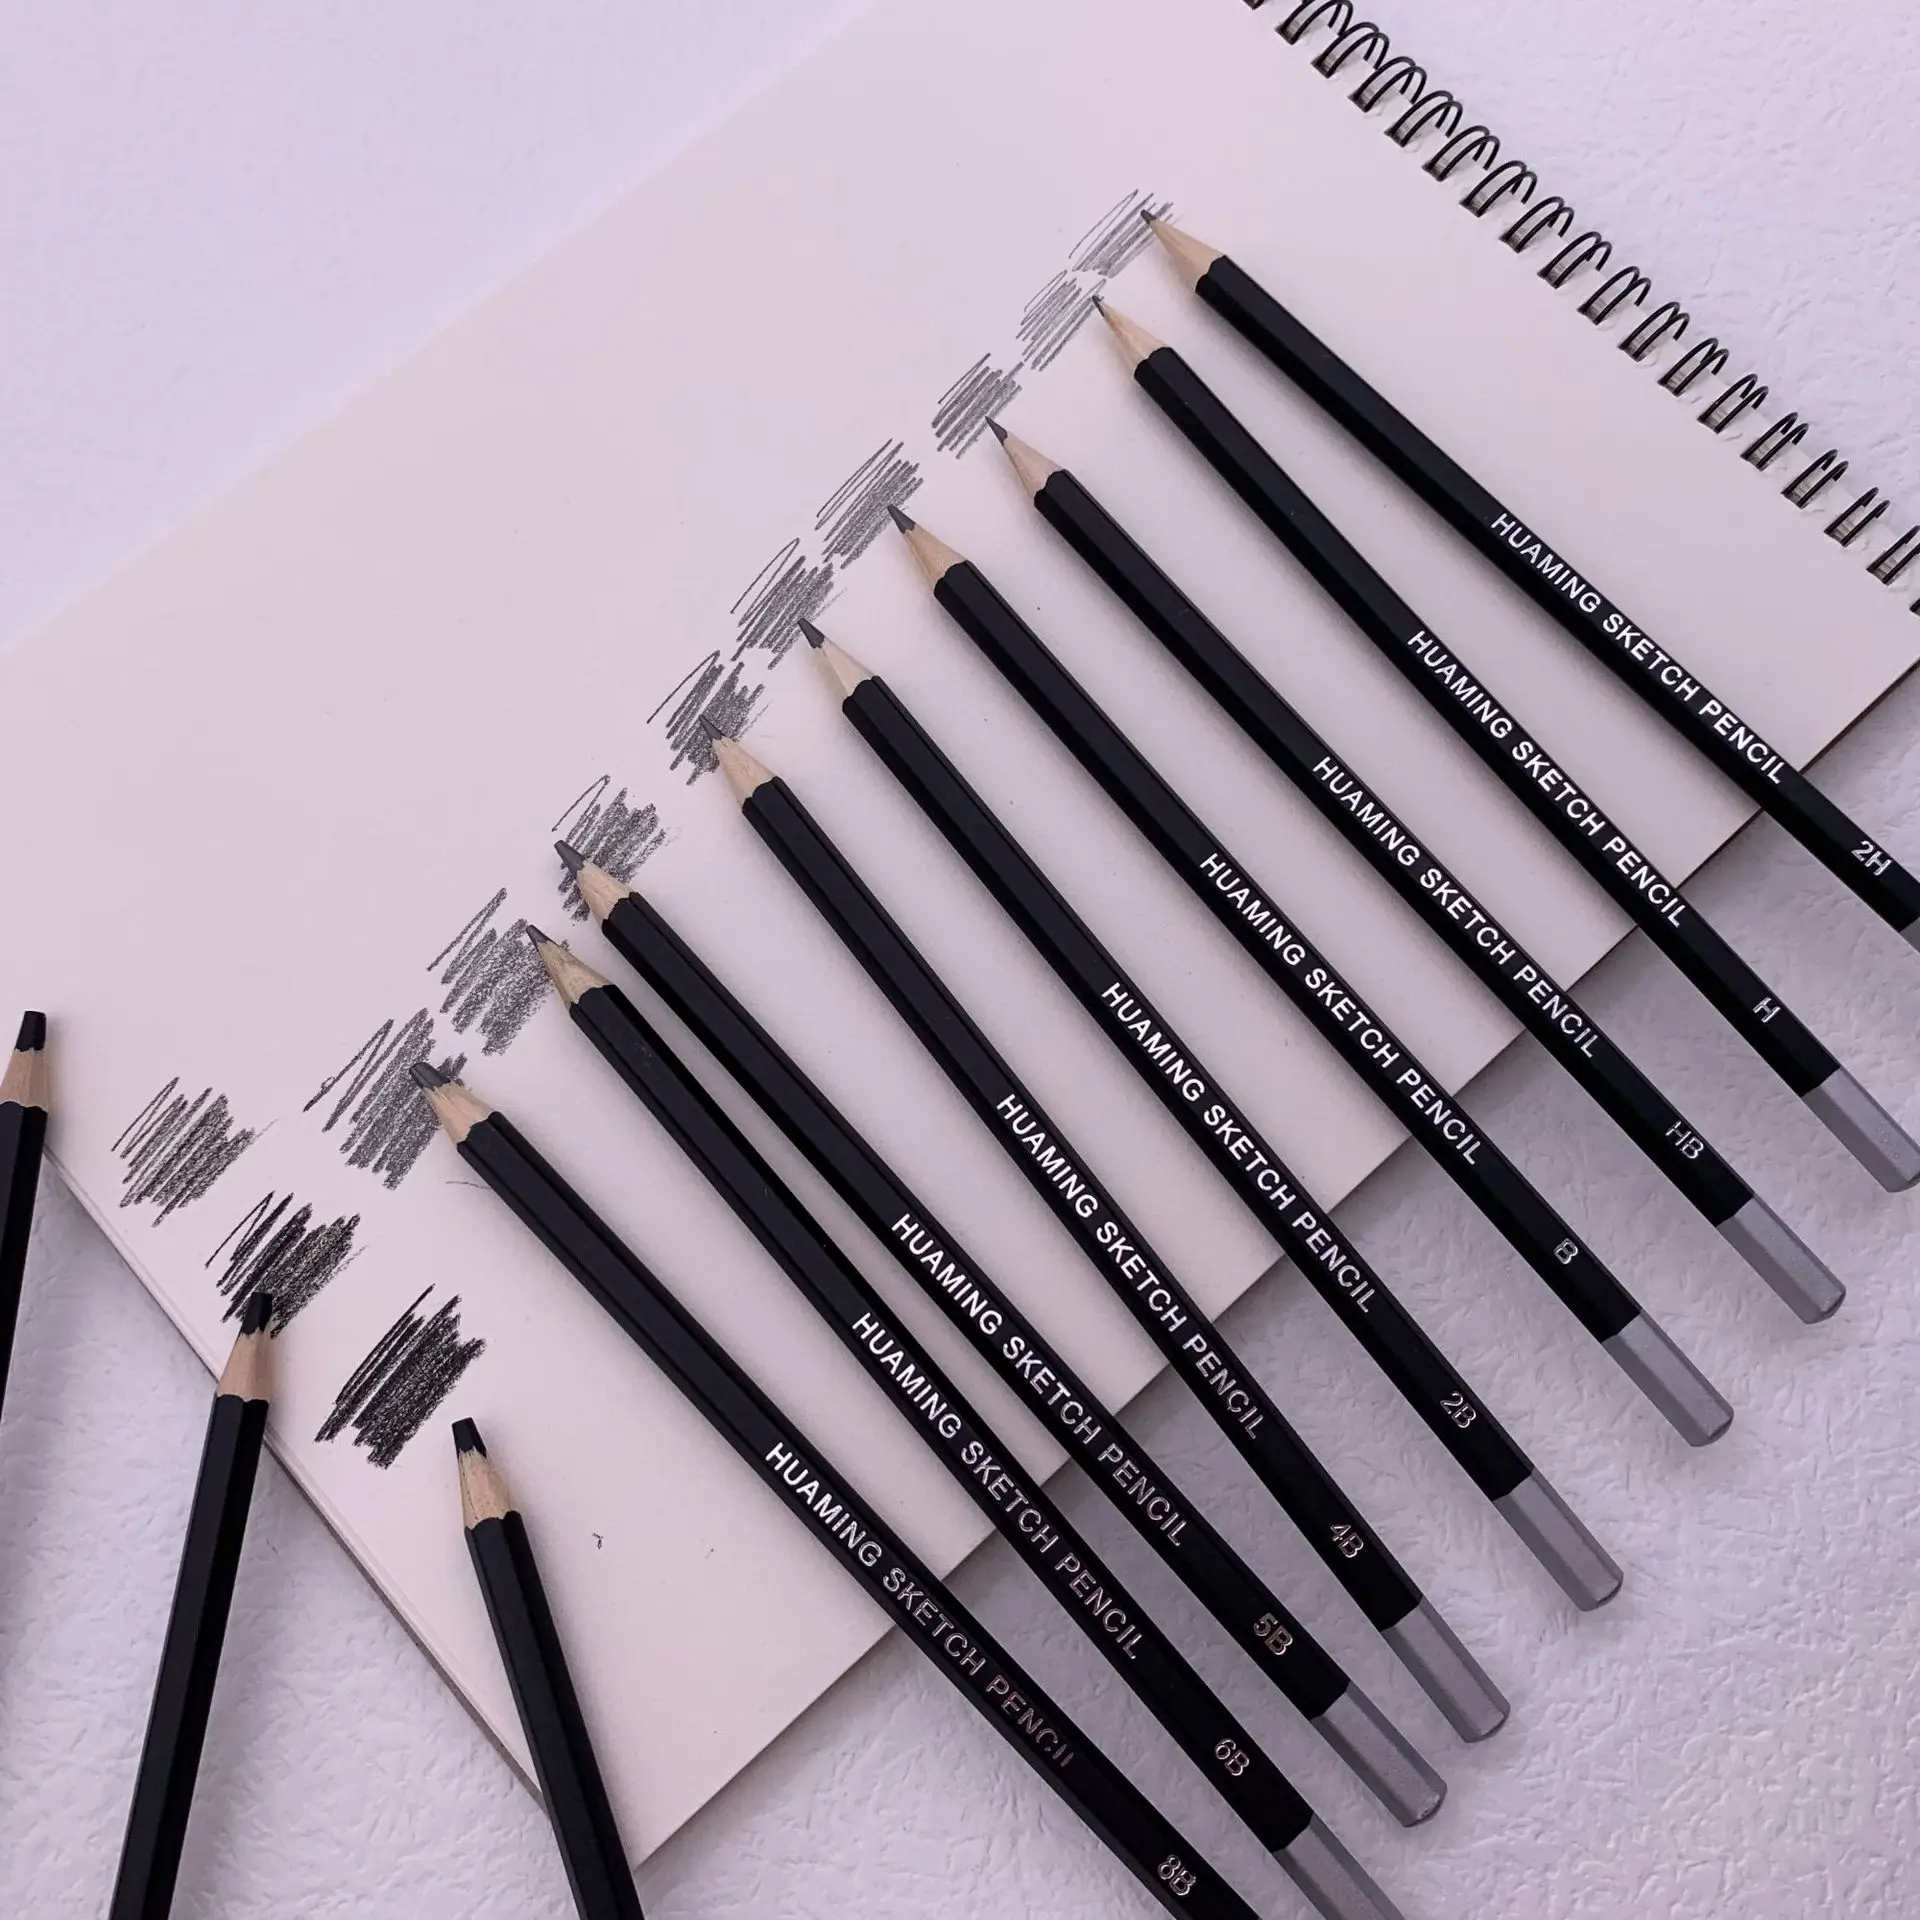 12PCS Sketch Charcoal Soft/medium/hard. Sketch Pencil Art student Special Hand-painted HB Painting Drawing Exam Pen marco sketch charcoal pencil highlight set professional painting art student beginner hand painted soft medium hard carbon